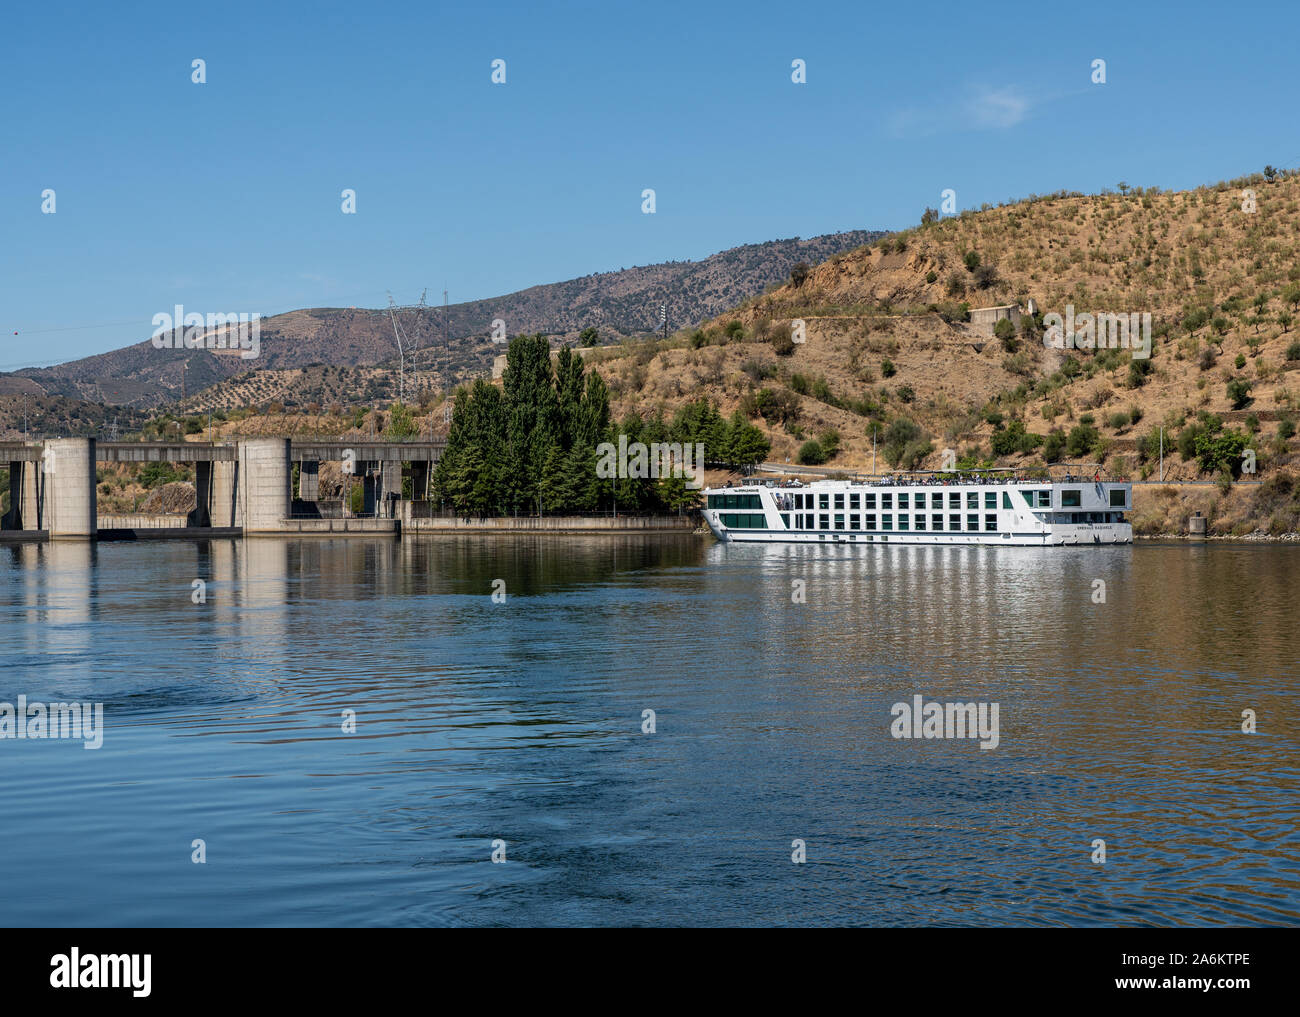 Bracanca, Portugal - 14 August 2019: Barragem do Pocinho dam on the River Duoro with Emerald Radiance about to enter lock Stock Photo